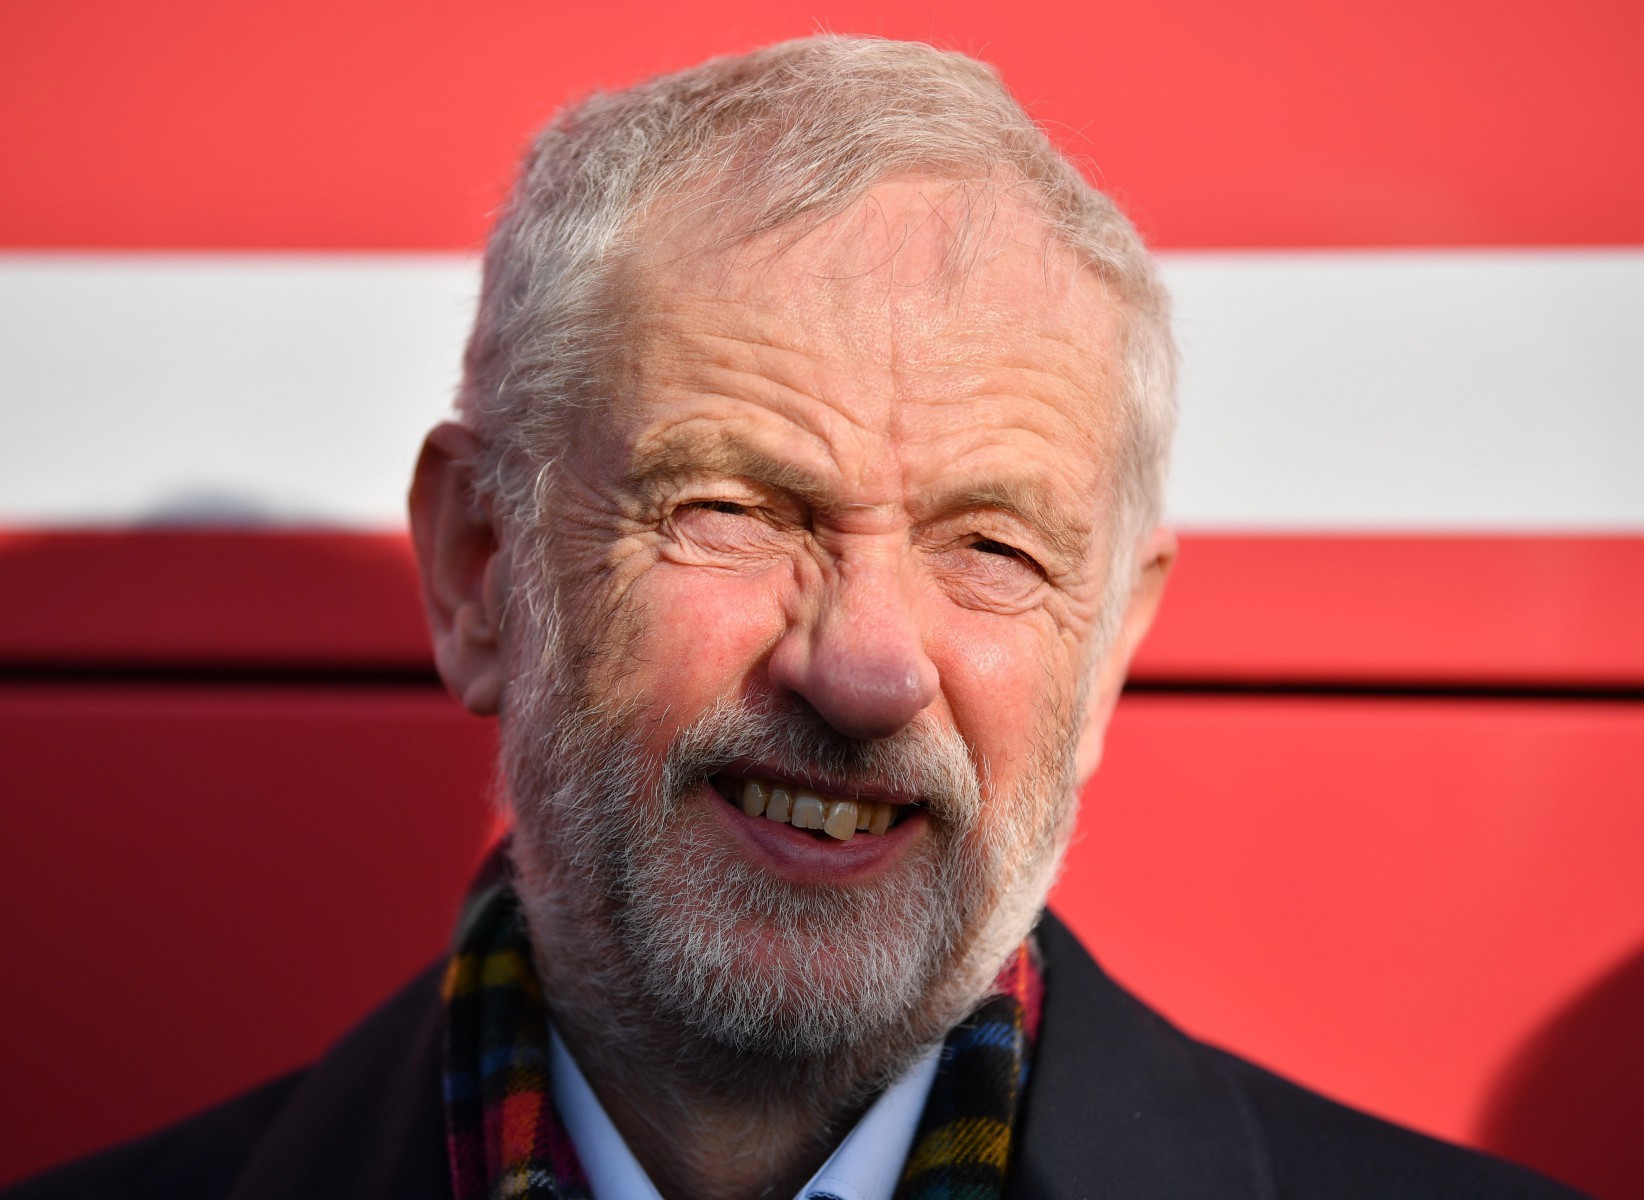 Jeremy Corbyn has been branded an extremist by a former Labour minister